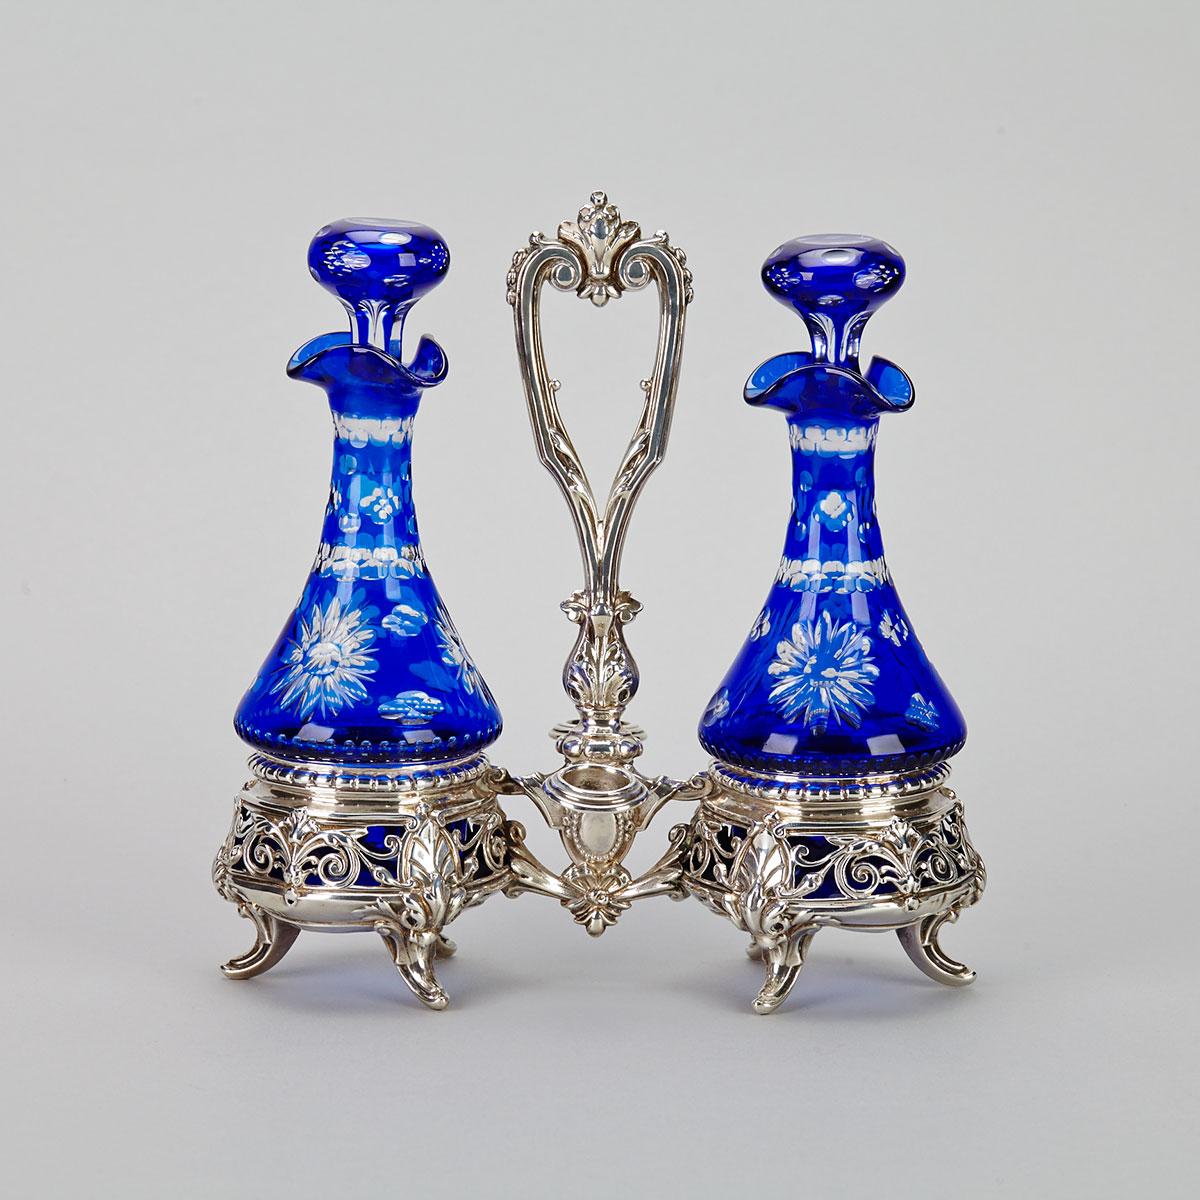 French Silver and Blue Glass Cruet, c.1870